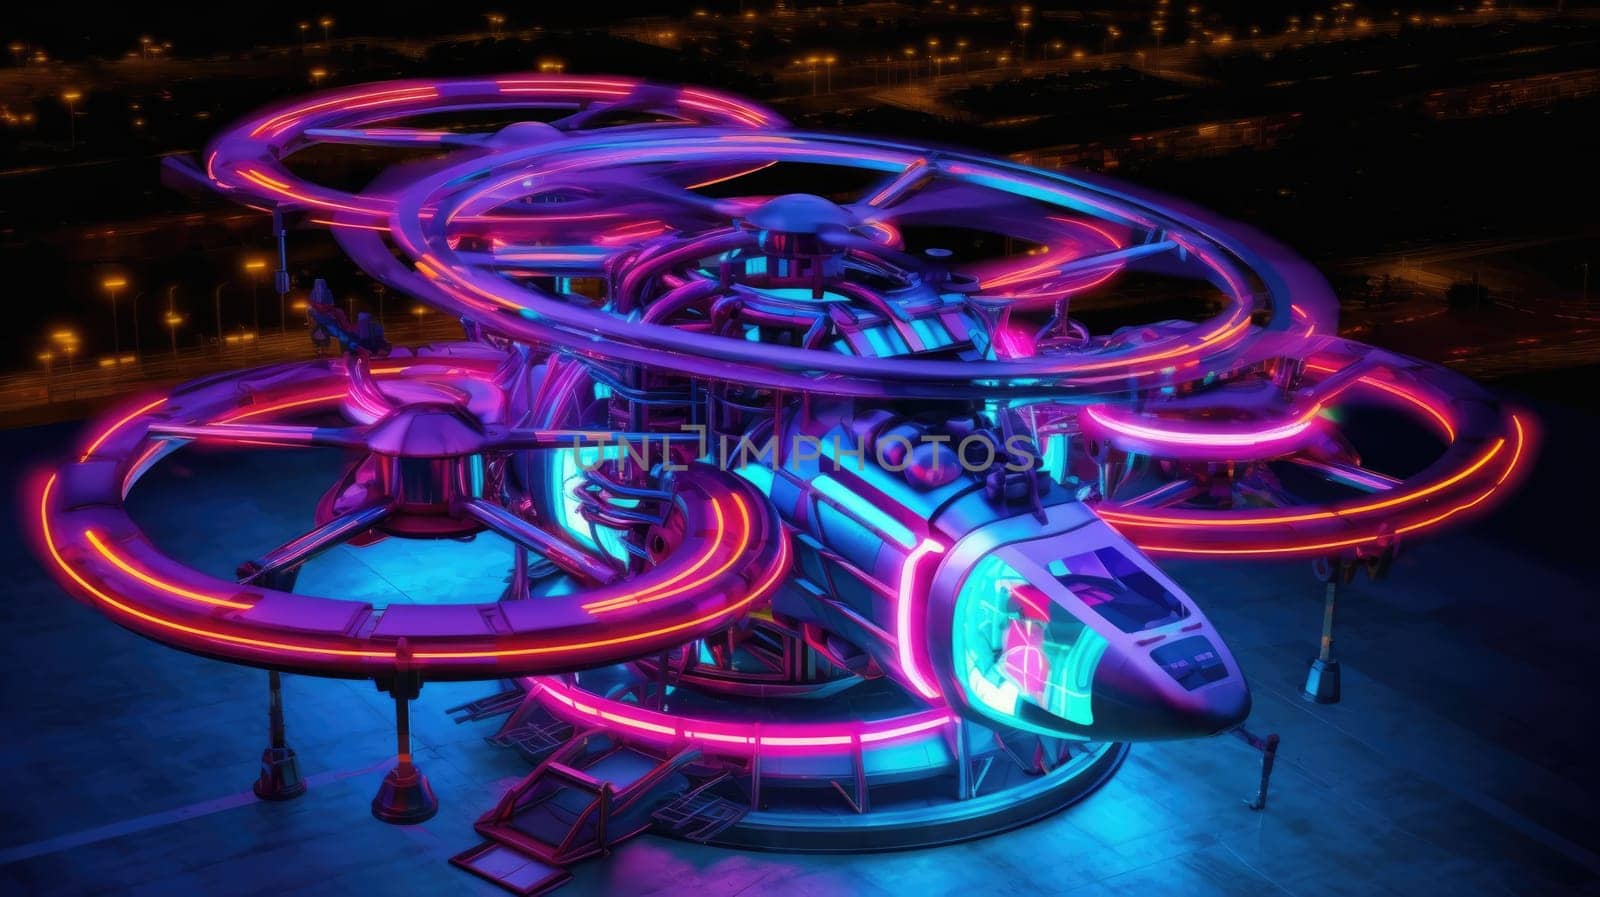 Futuristic helicopter On Black Background In Cyberpunk Style With Glowing Neon Lights by JuliaDorian